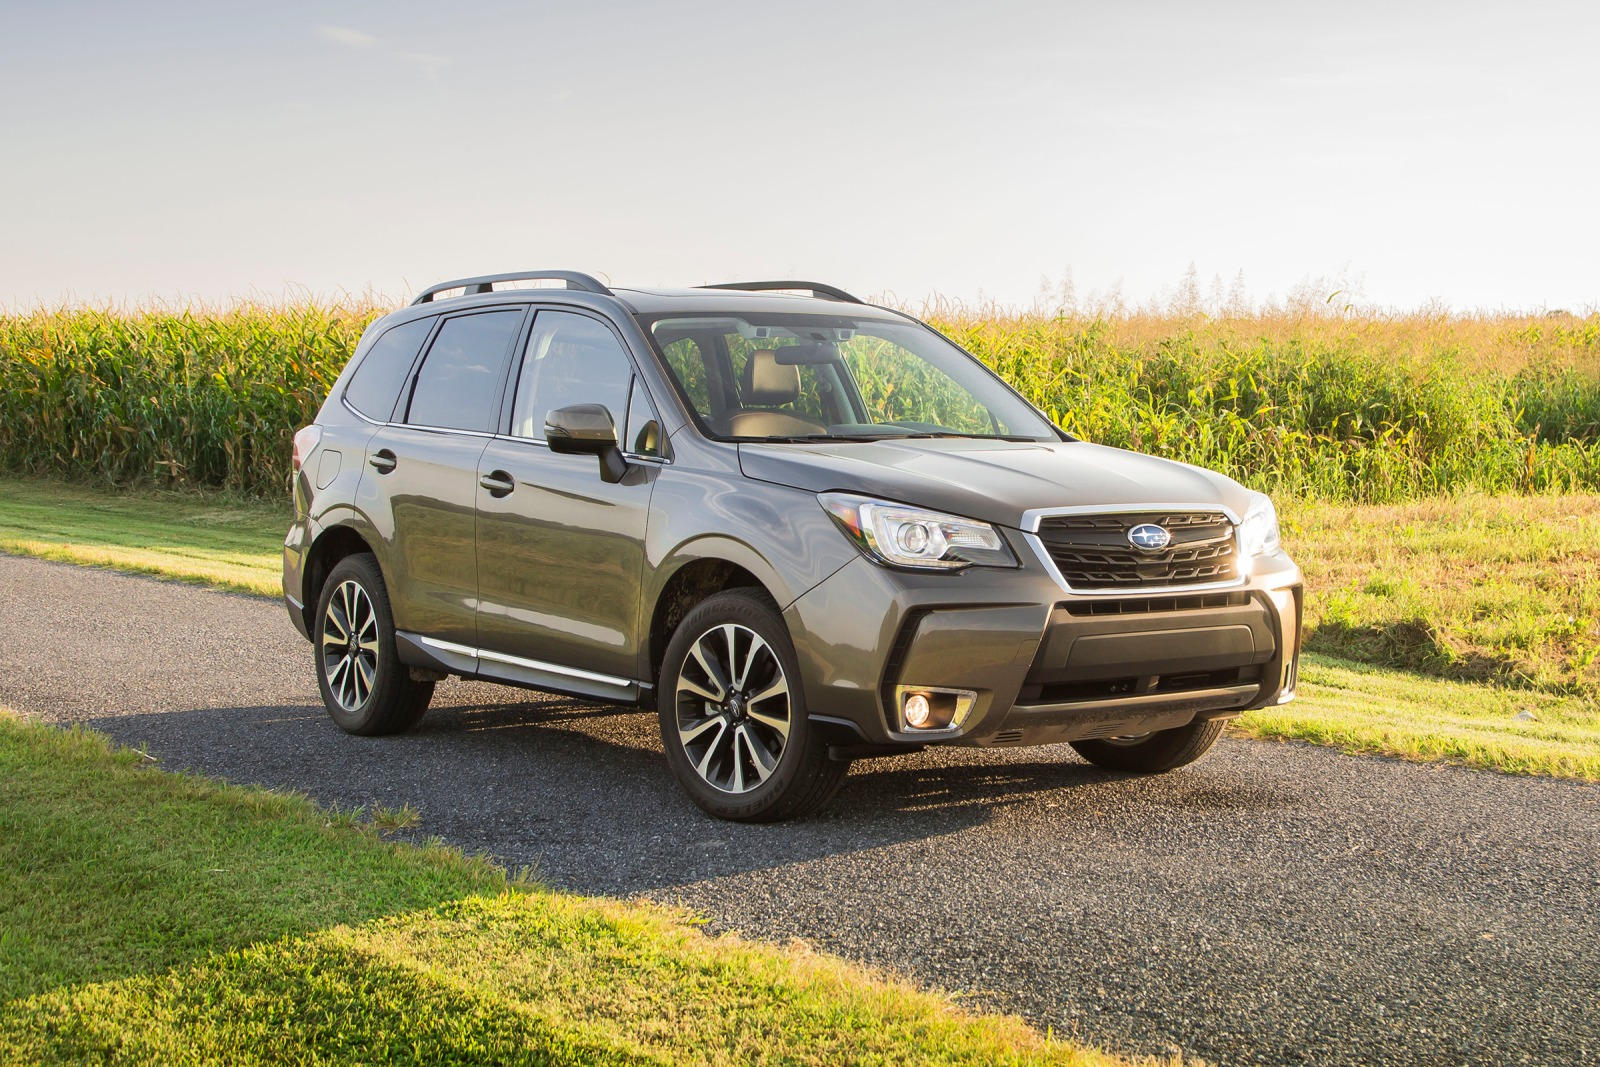 2018 Subaru Forester Three Quarter Front Right Side View